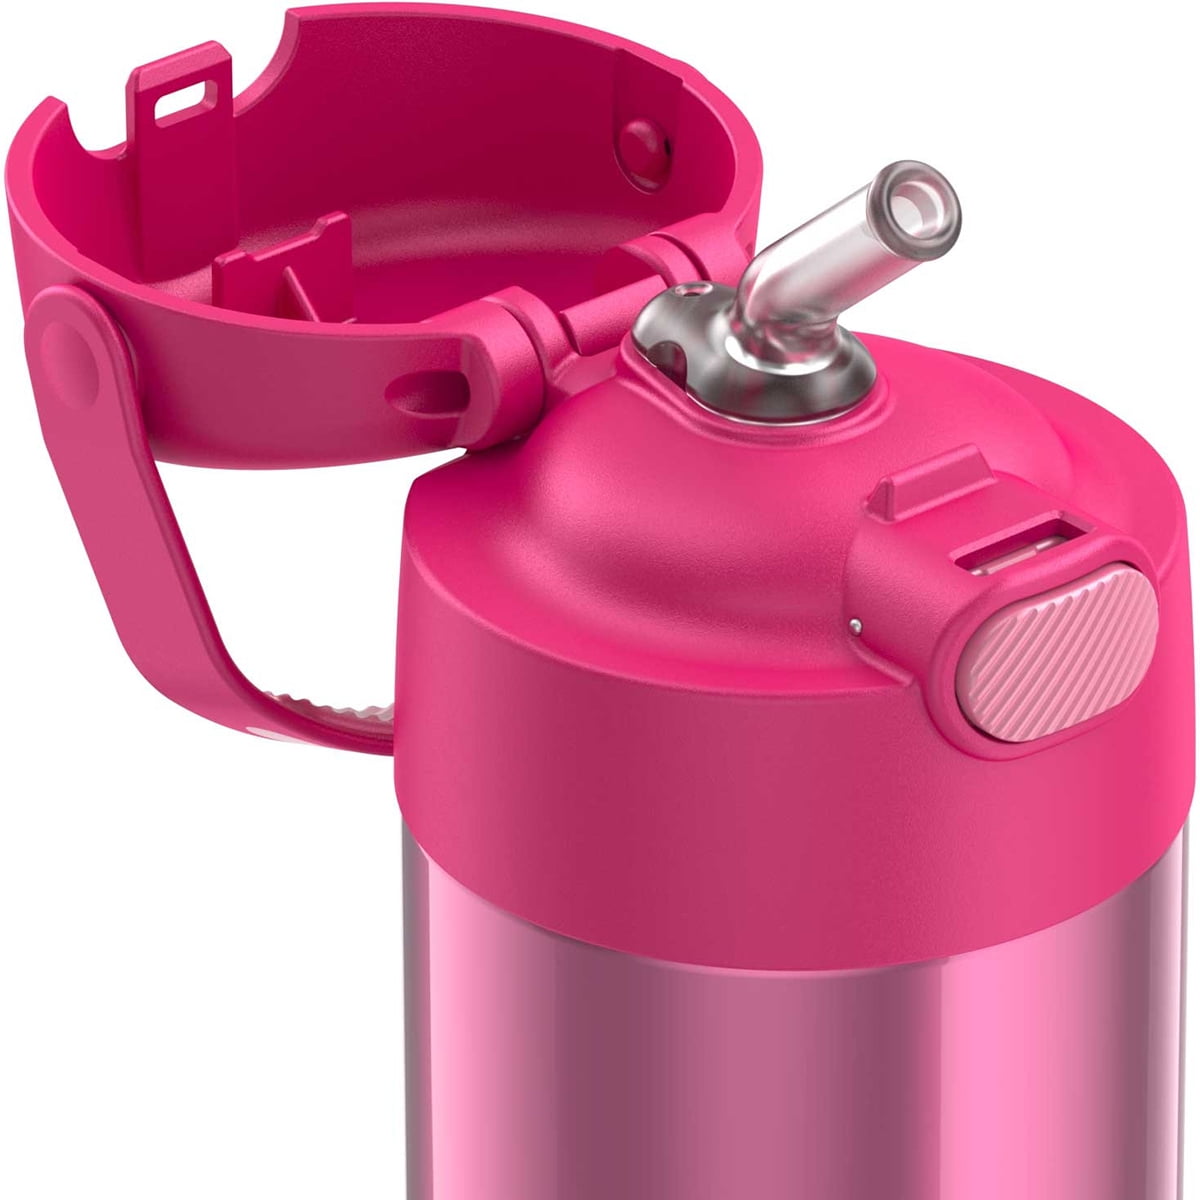 Insulated bottle 50cl / 17oz pink - Thermocafé - Thermos